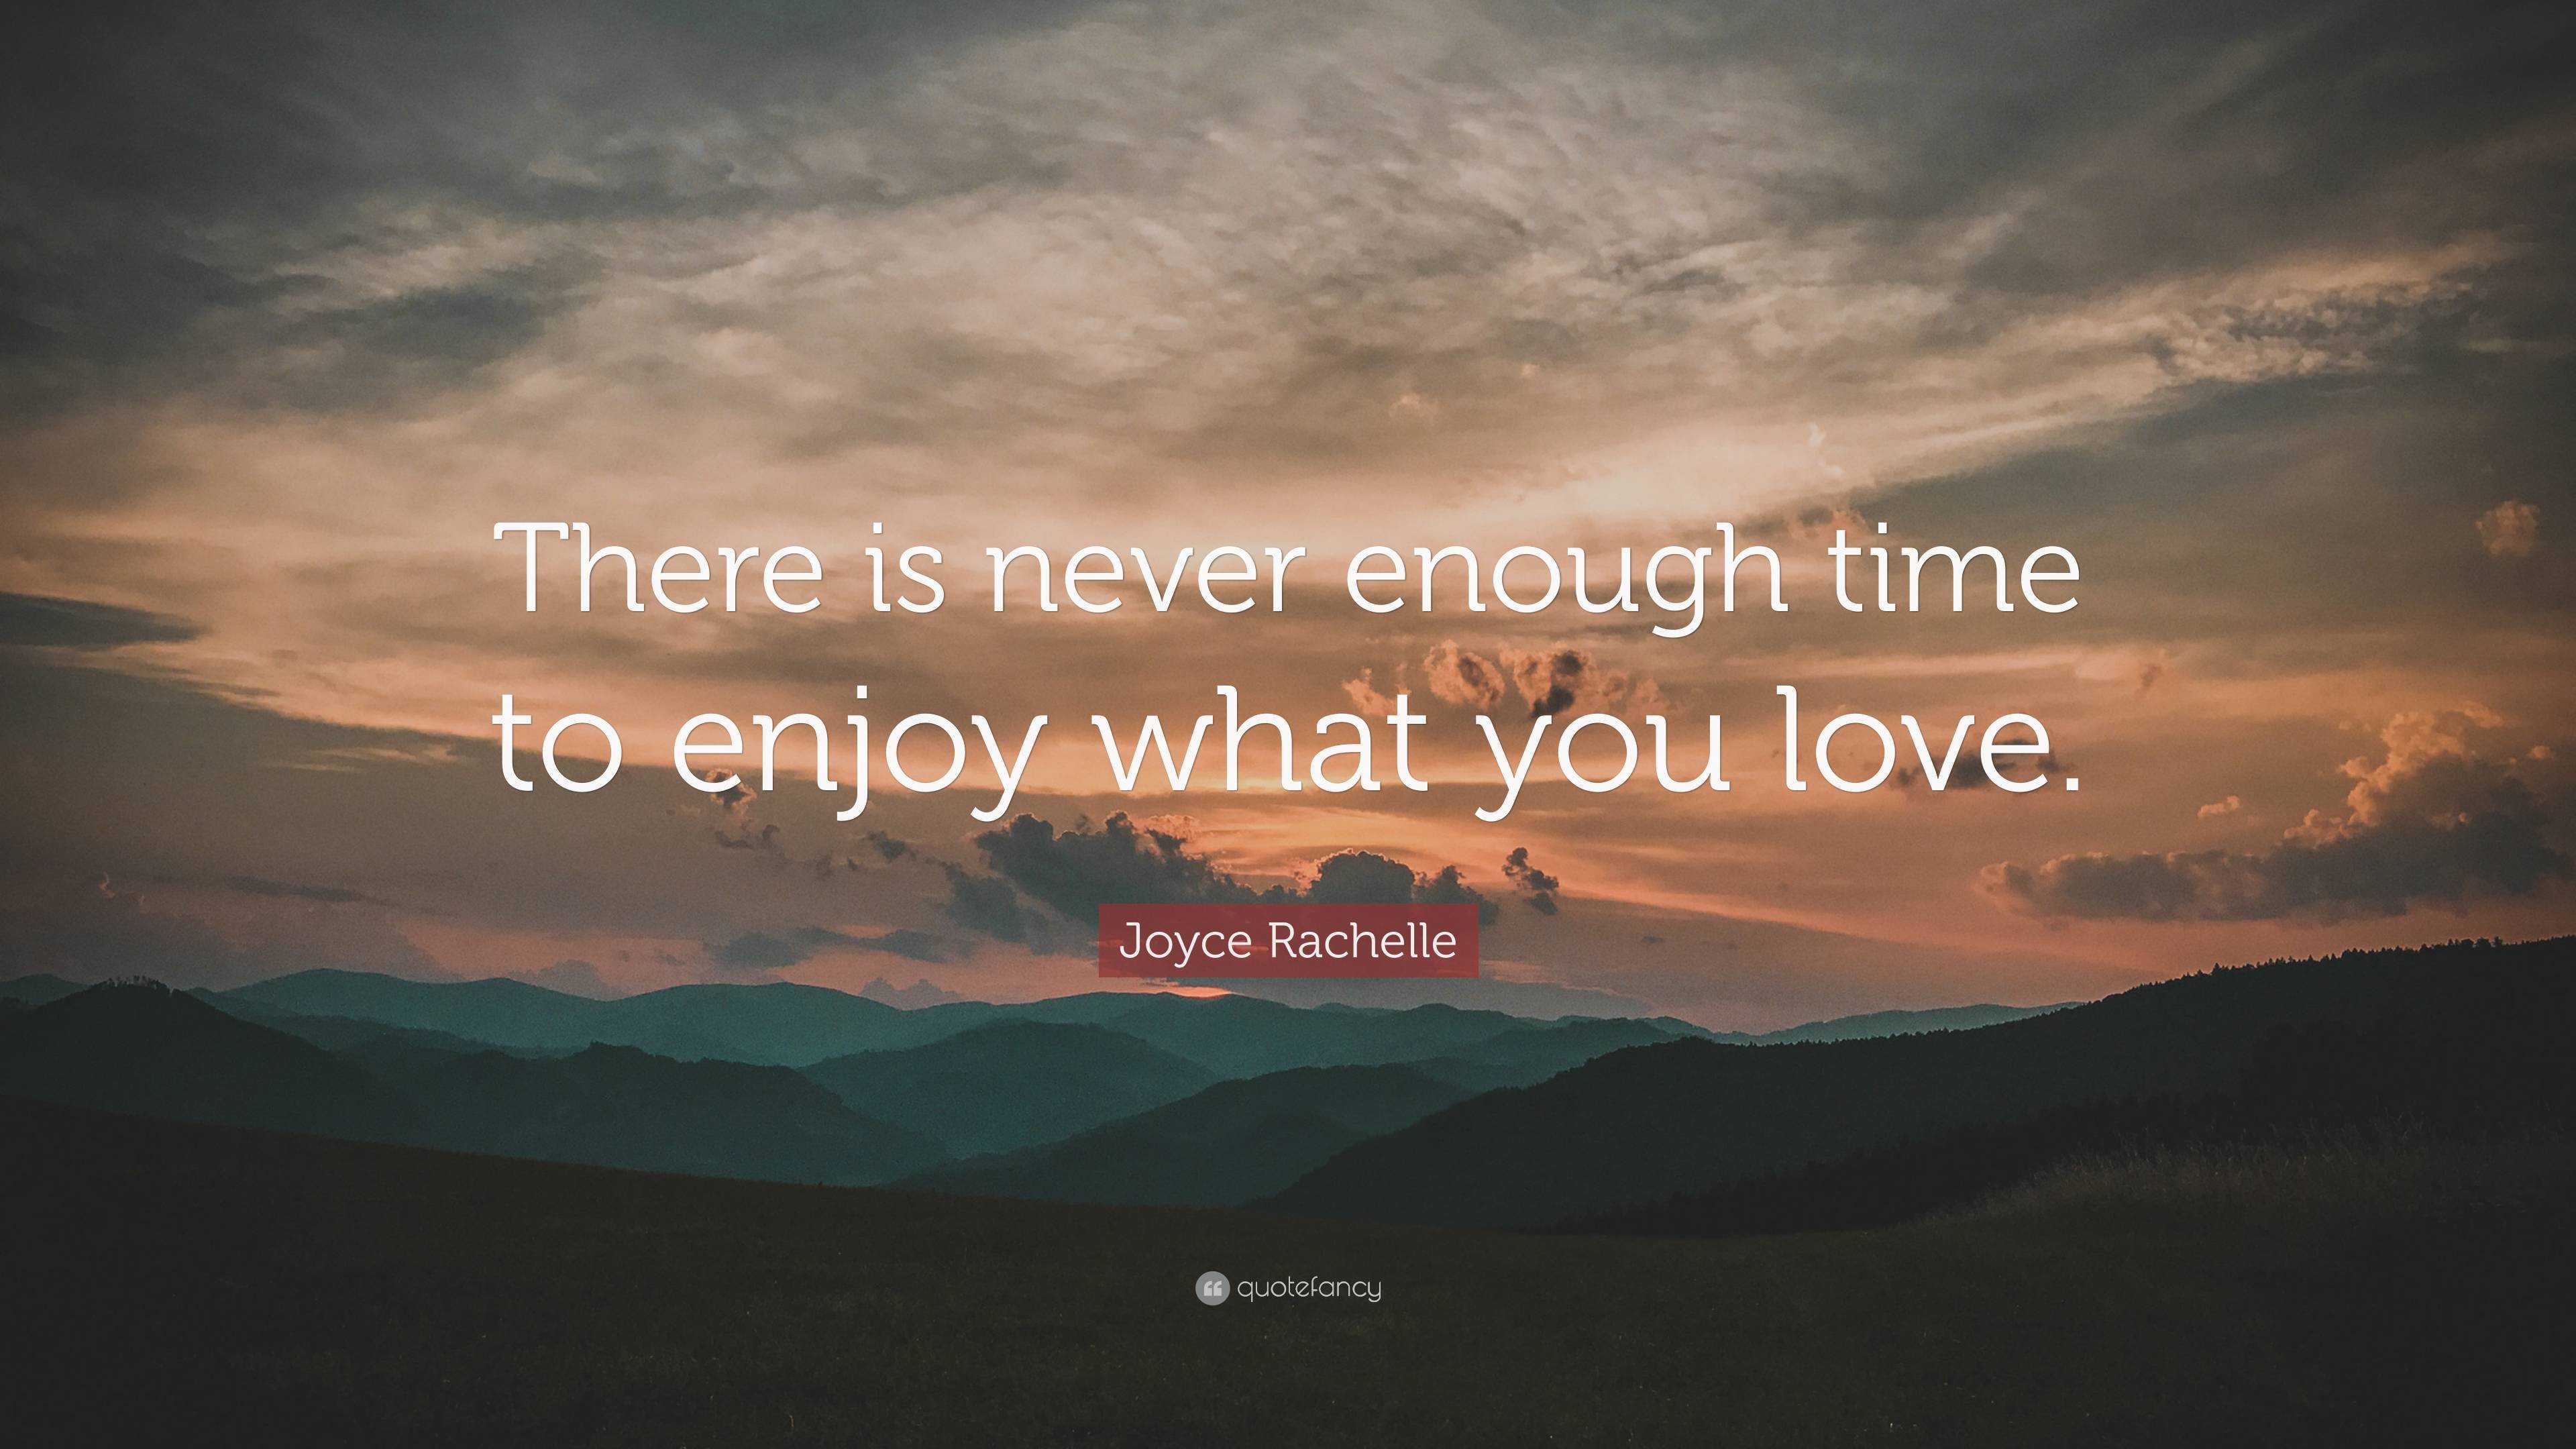 Joyce Rachelle Quote: “There is never enough time to enjoy what you love.”